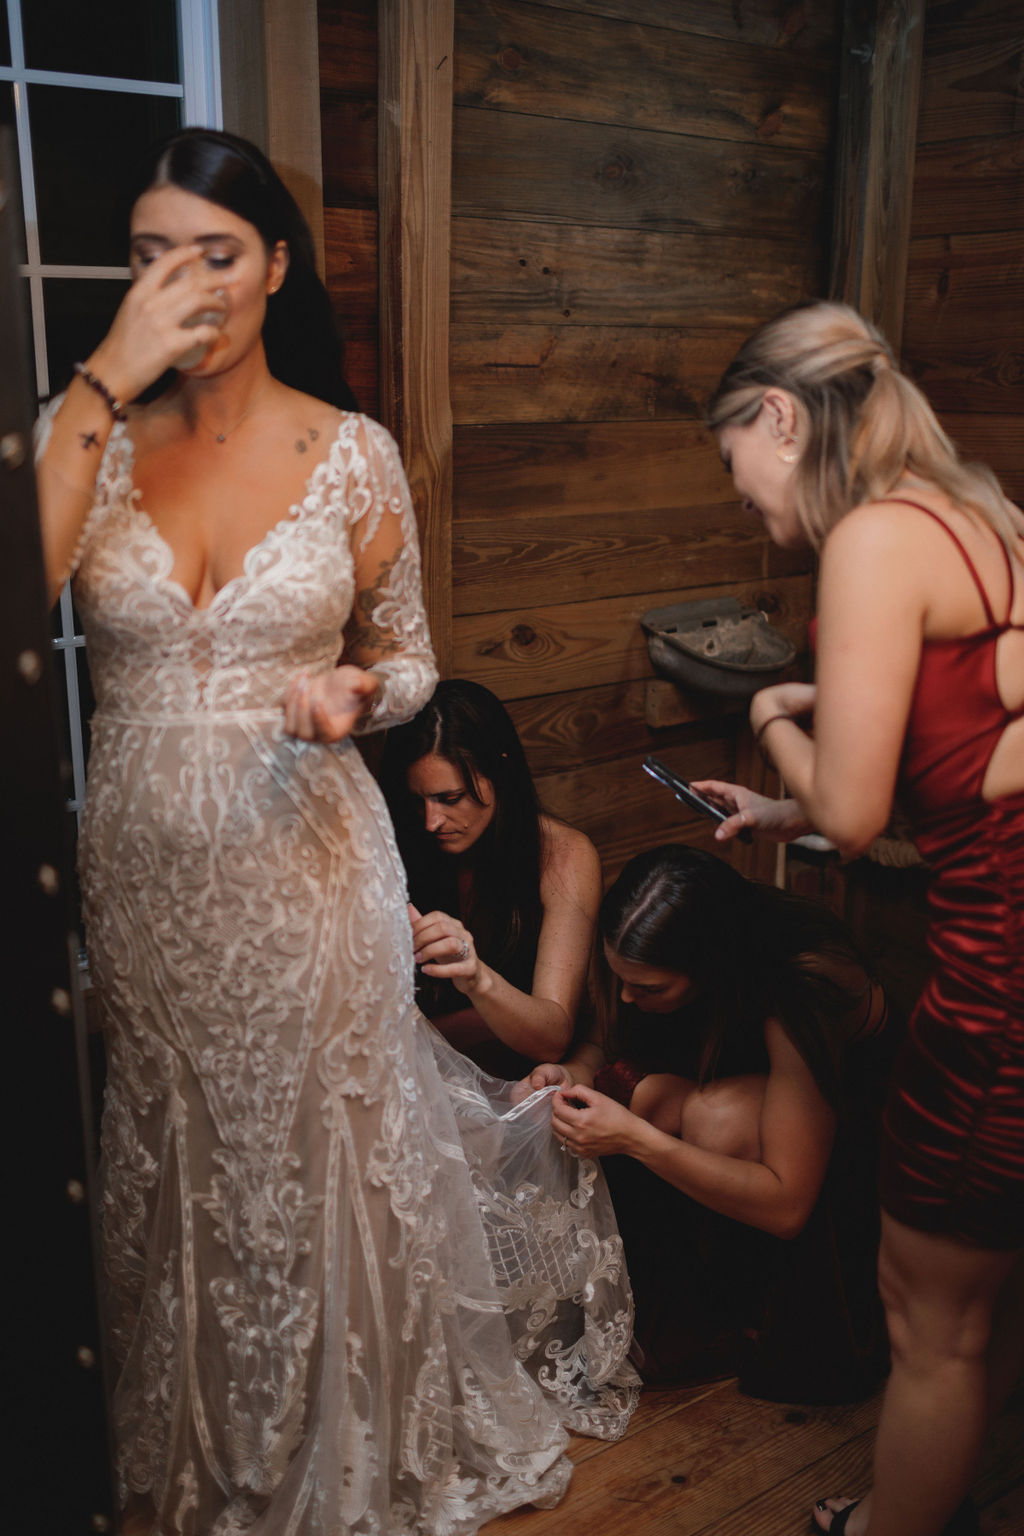 bridesmaids bustling a bride's dress while the bride takes a sip from a cup